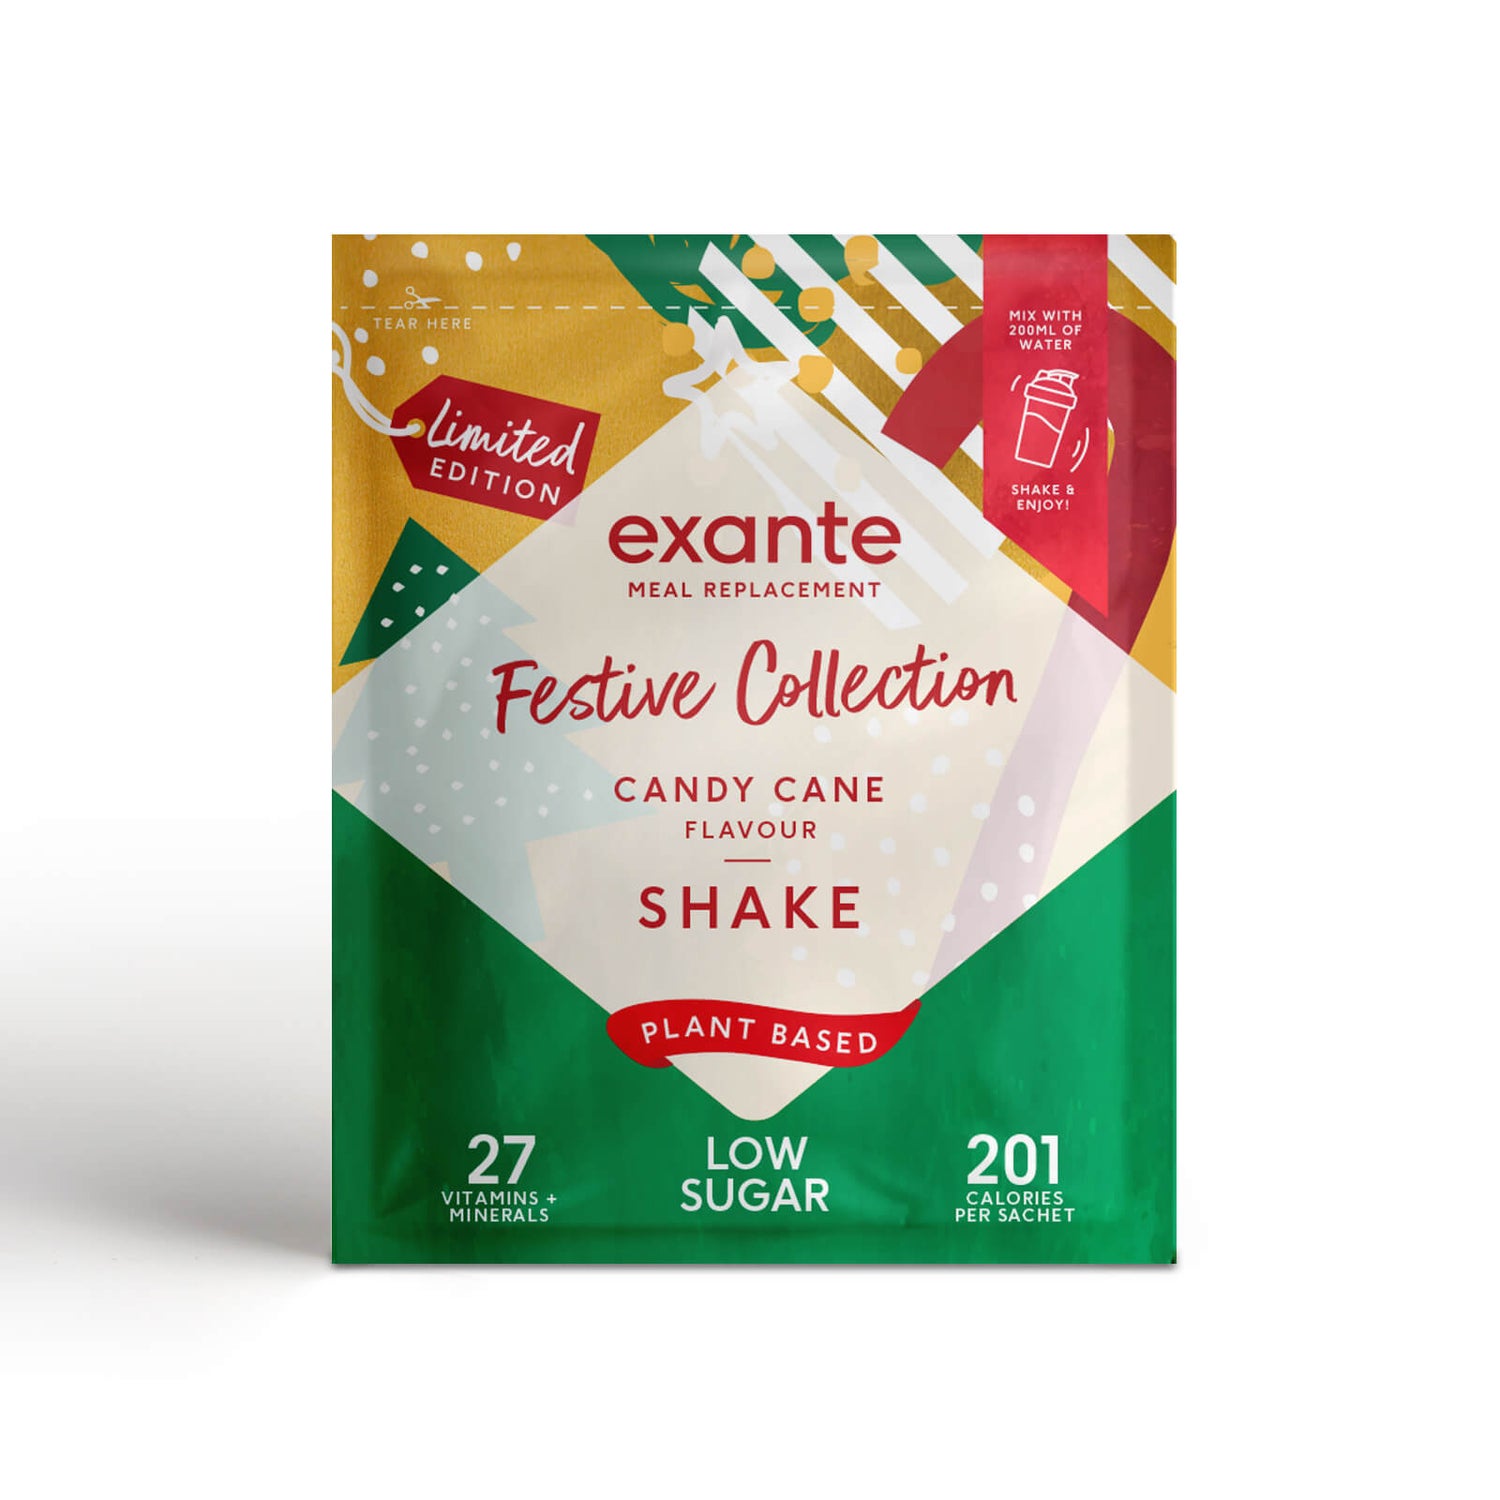 Plant Based Meal Replacement Candy Cane Shake - Box of 7